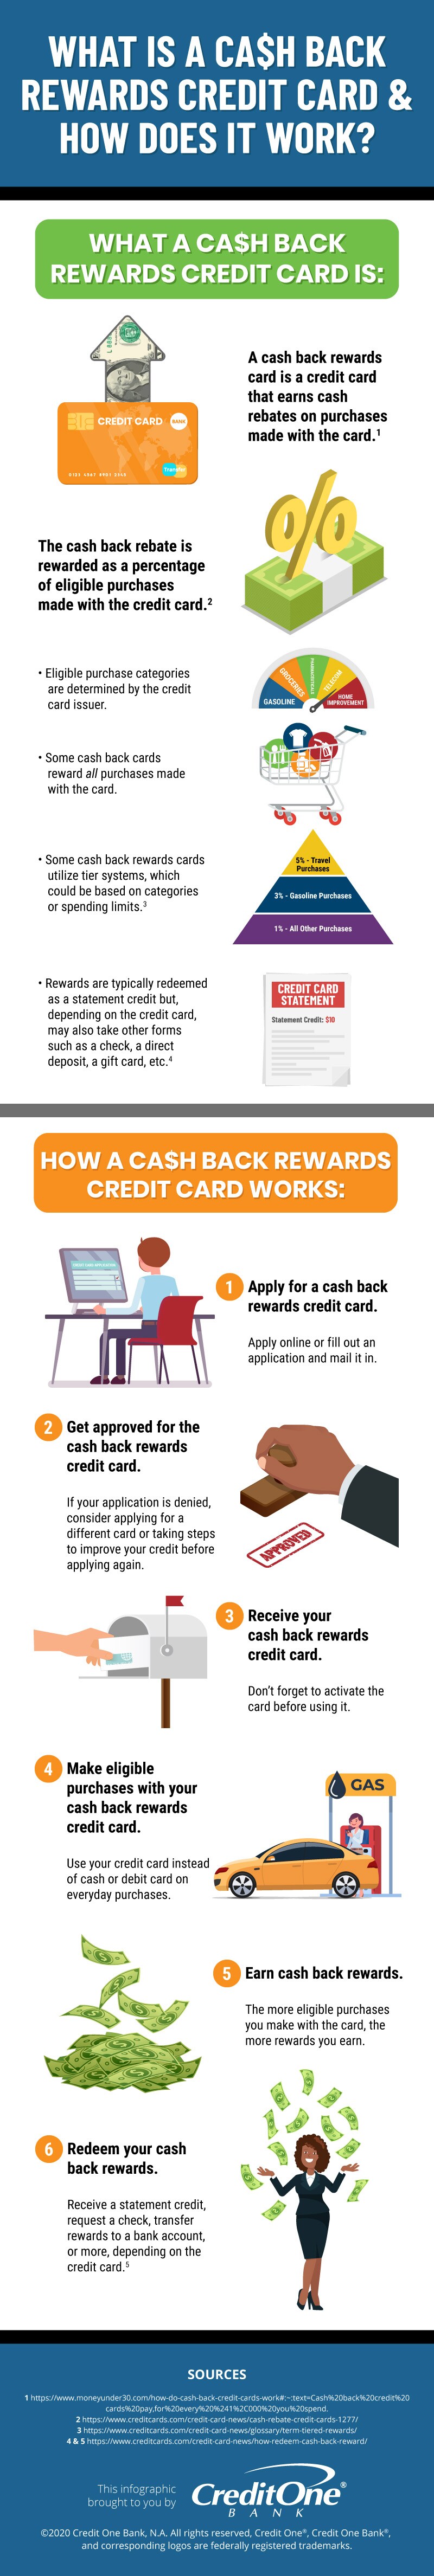 How a Cash Back Credit Card Works [Infographic]